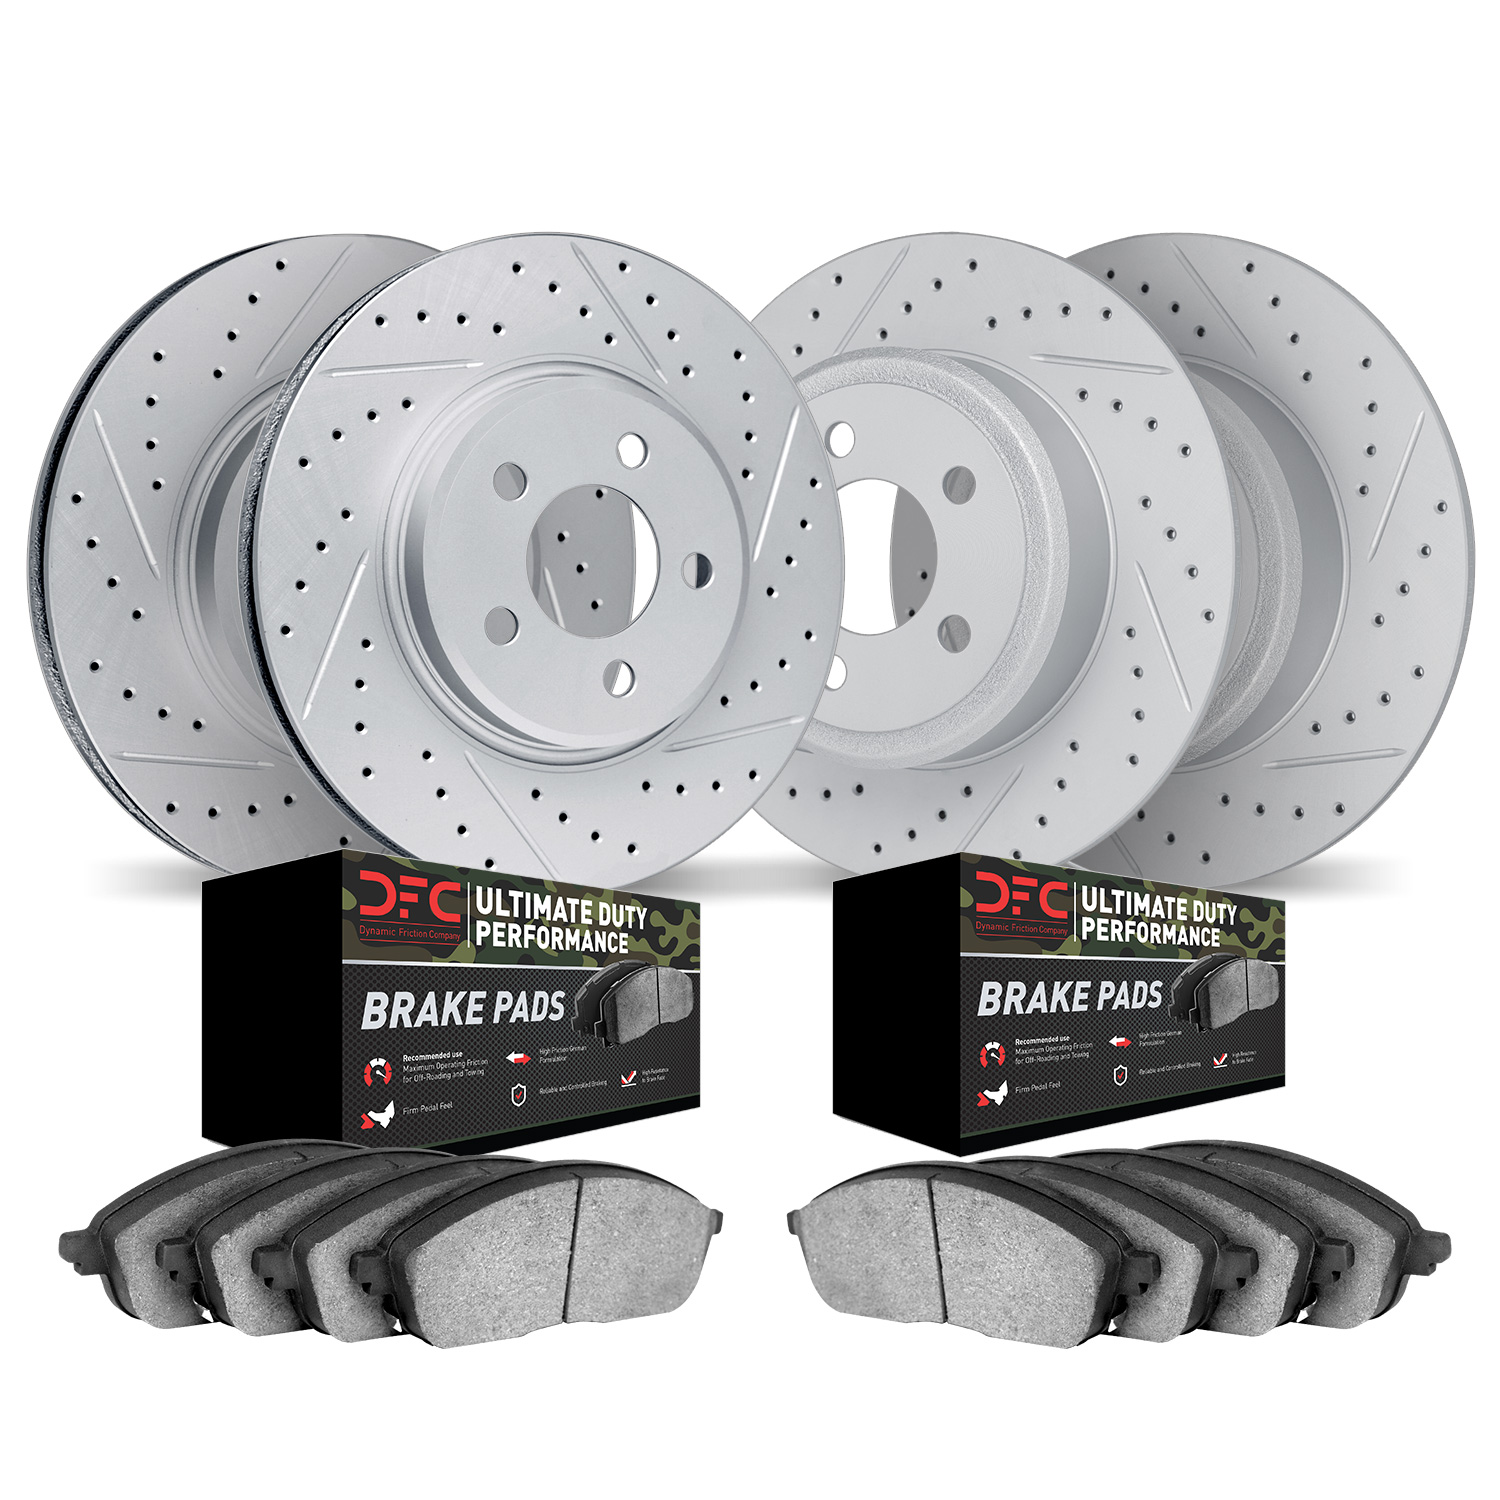 2404-54020 Geoperformance Drilled/Slotted Brake Rotors with Ultimate-Duty Brake Pads Kit, 2003-2005 Ford/Lincoln/Mercury/Mazda,